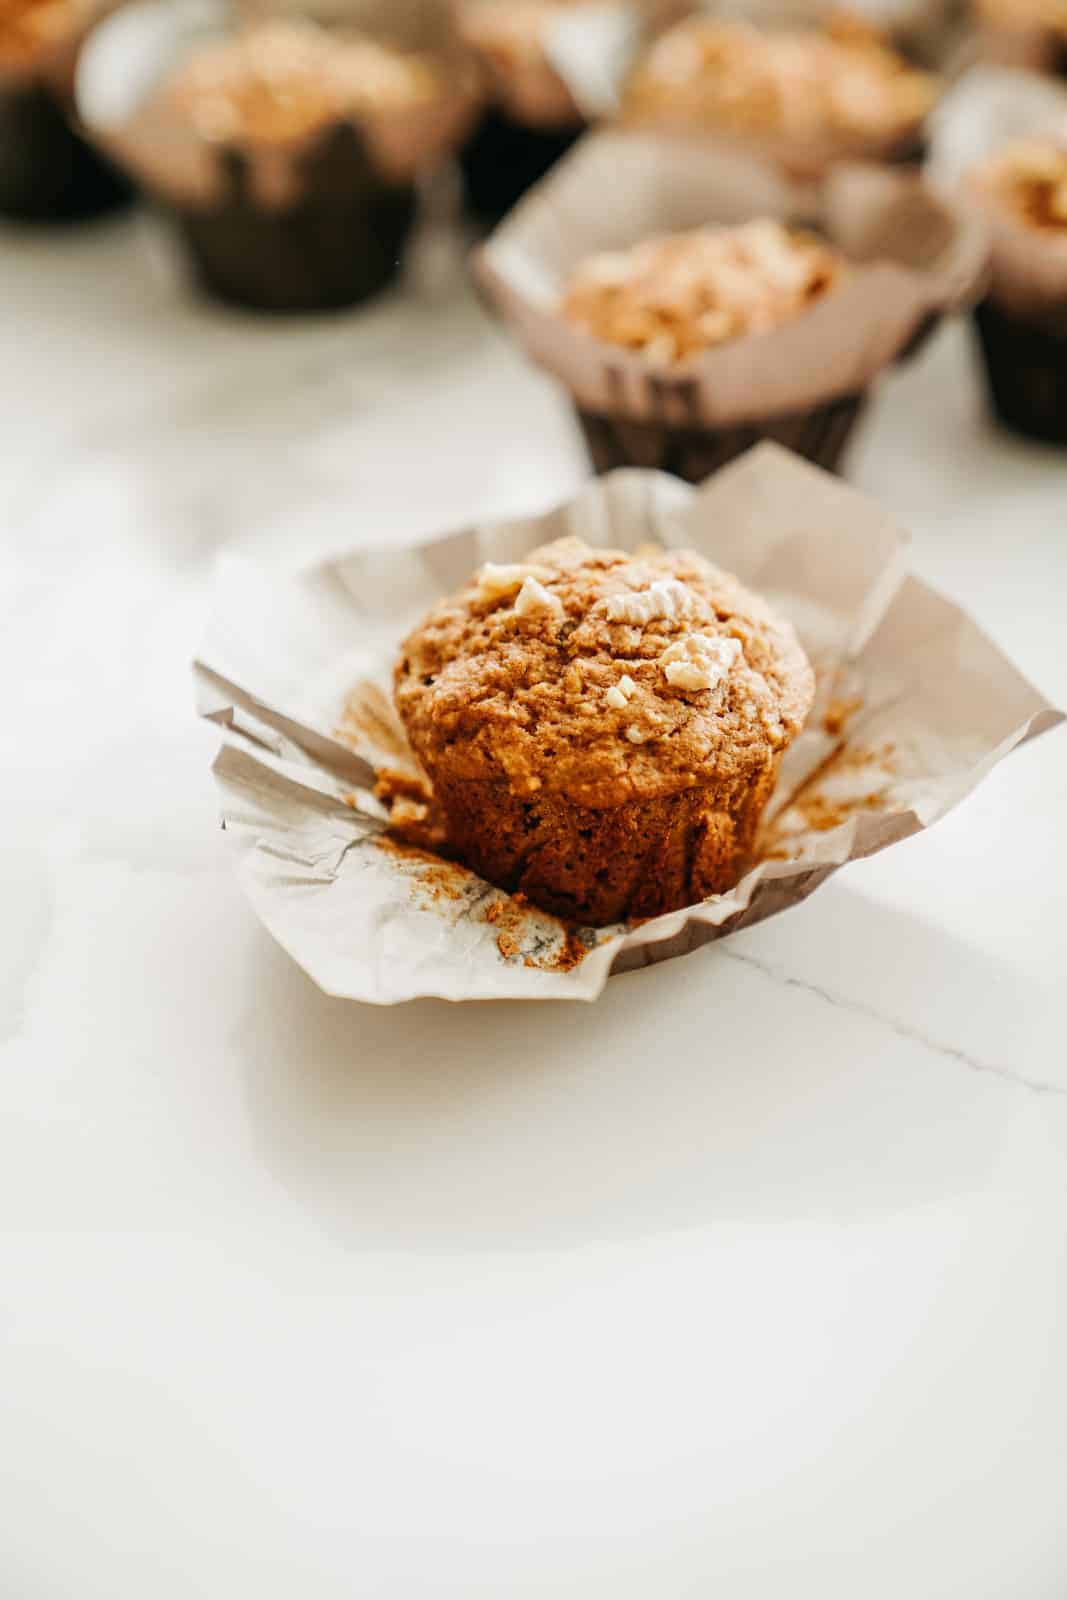 Vegan Apple Cinnamon Muffin with muffin wrapper peeled off, ready to eat.